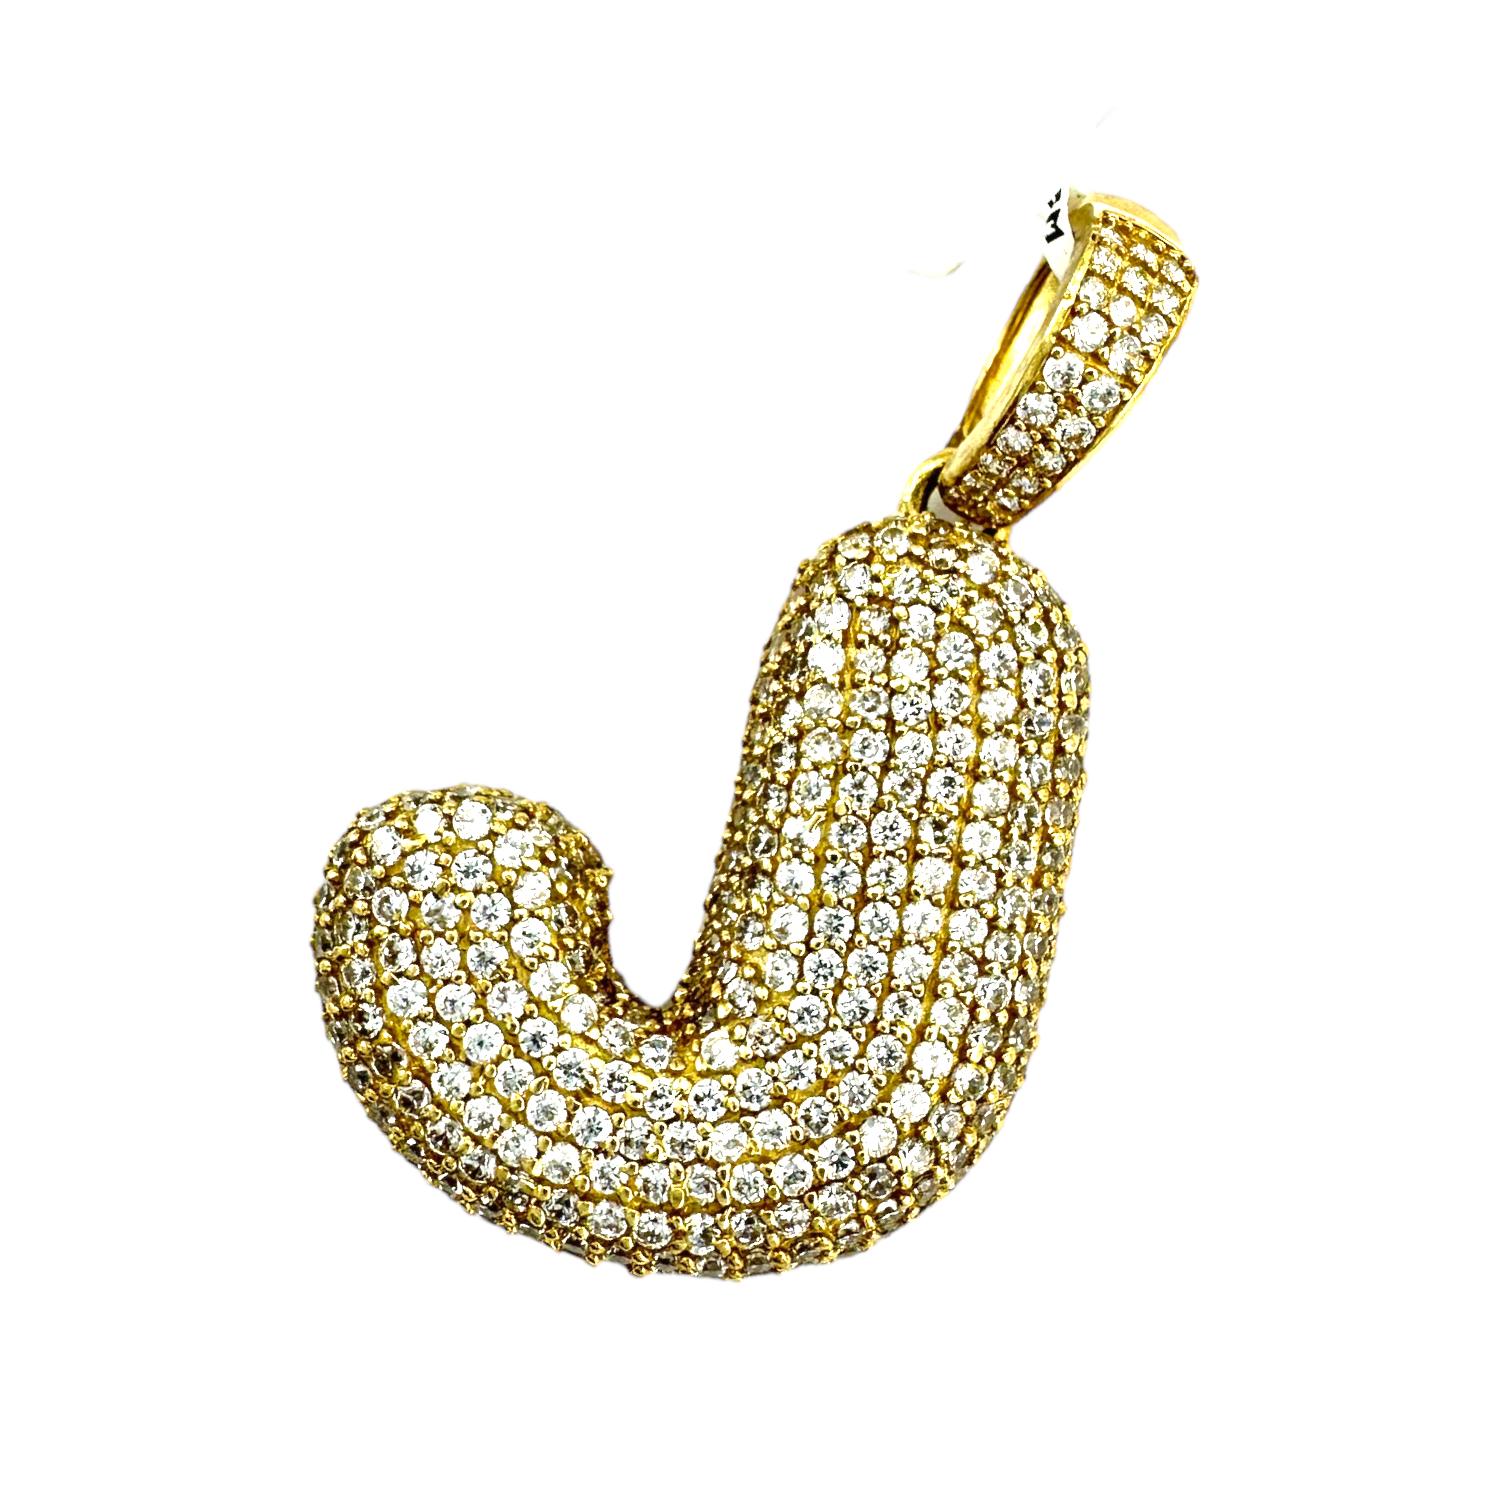 14kt initial letter J is made with twelve rows of fine diamonds. The diamonds are set in a convex rounded edge complete with diamonds, finely set in a pave fashion. The diamonds are micro-set and weigh 3.50 carats. The quality of the diamonds is SI